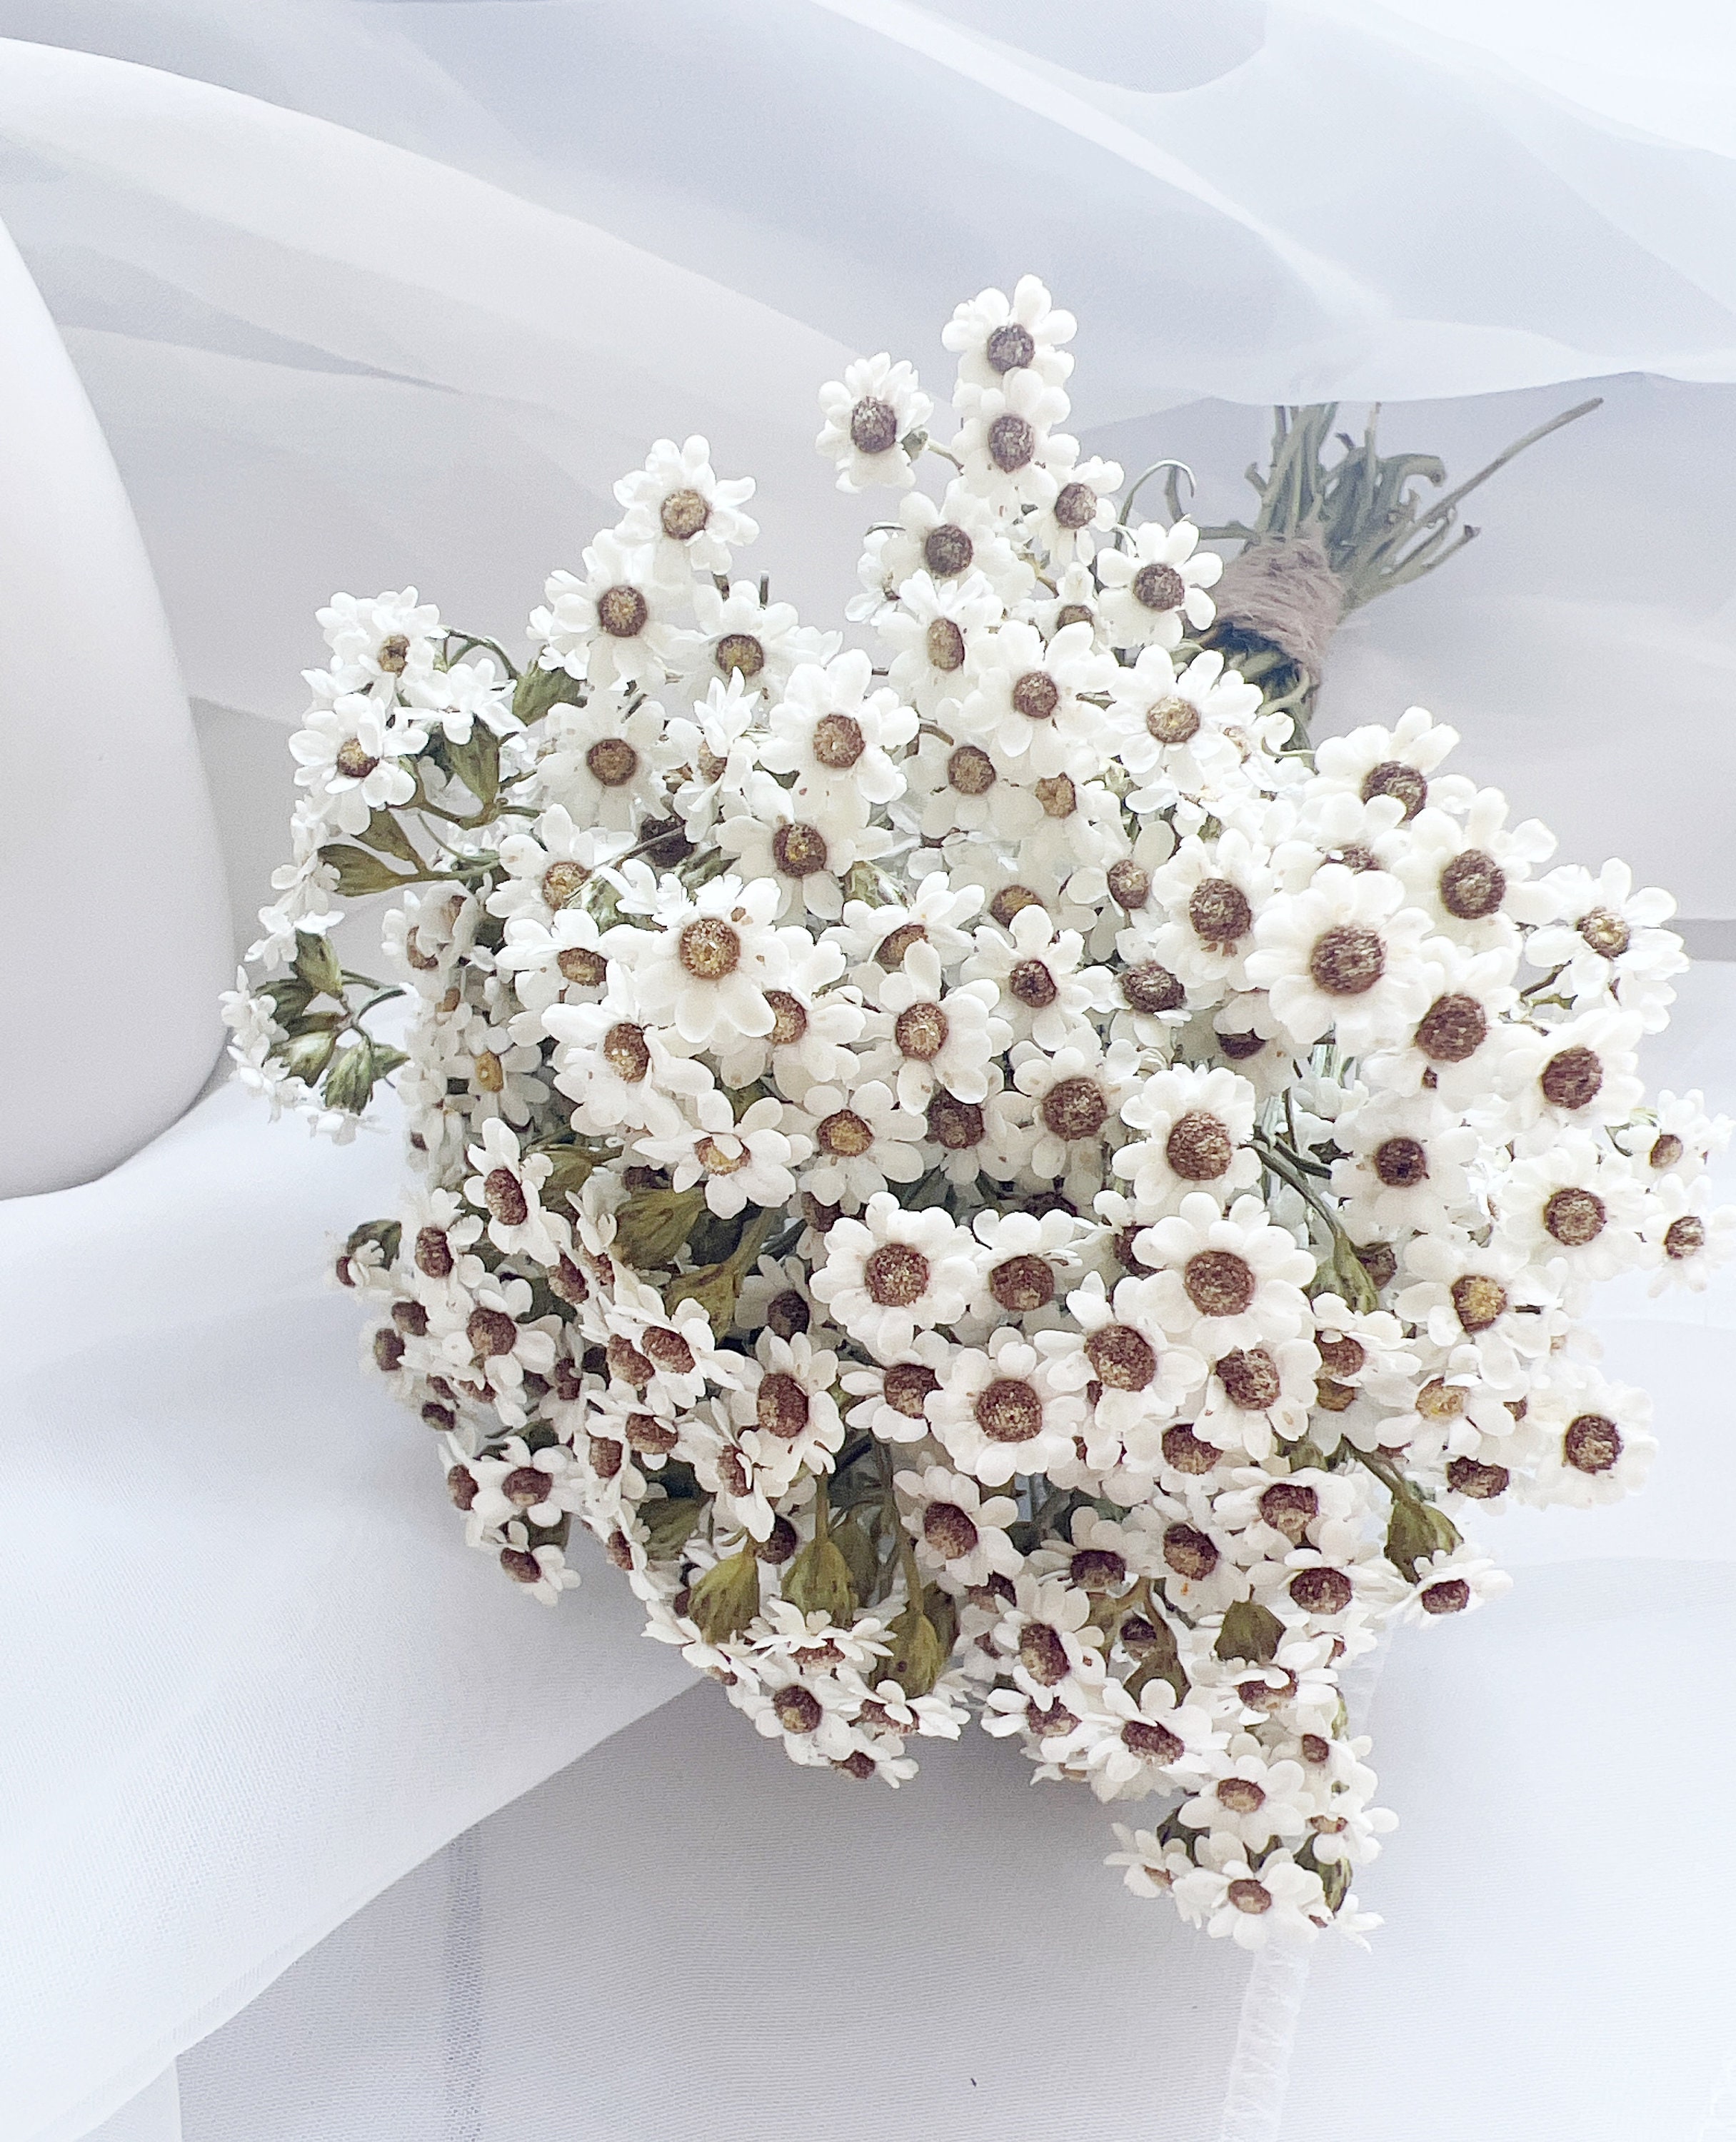 Natural Dried Baby's Breath Bouquet, Greenery Bridal Bouquet